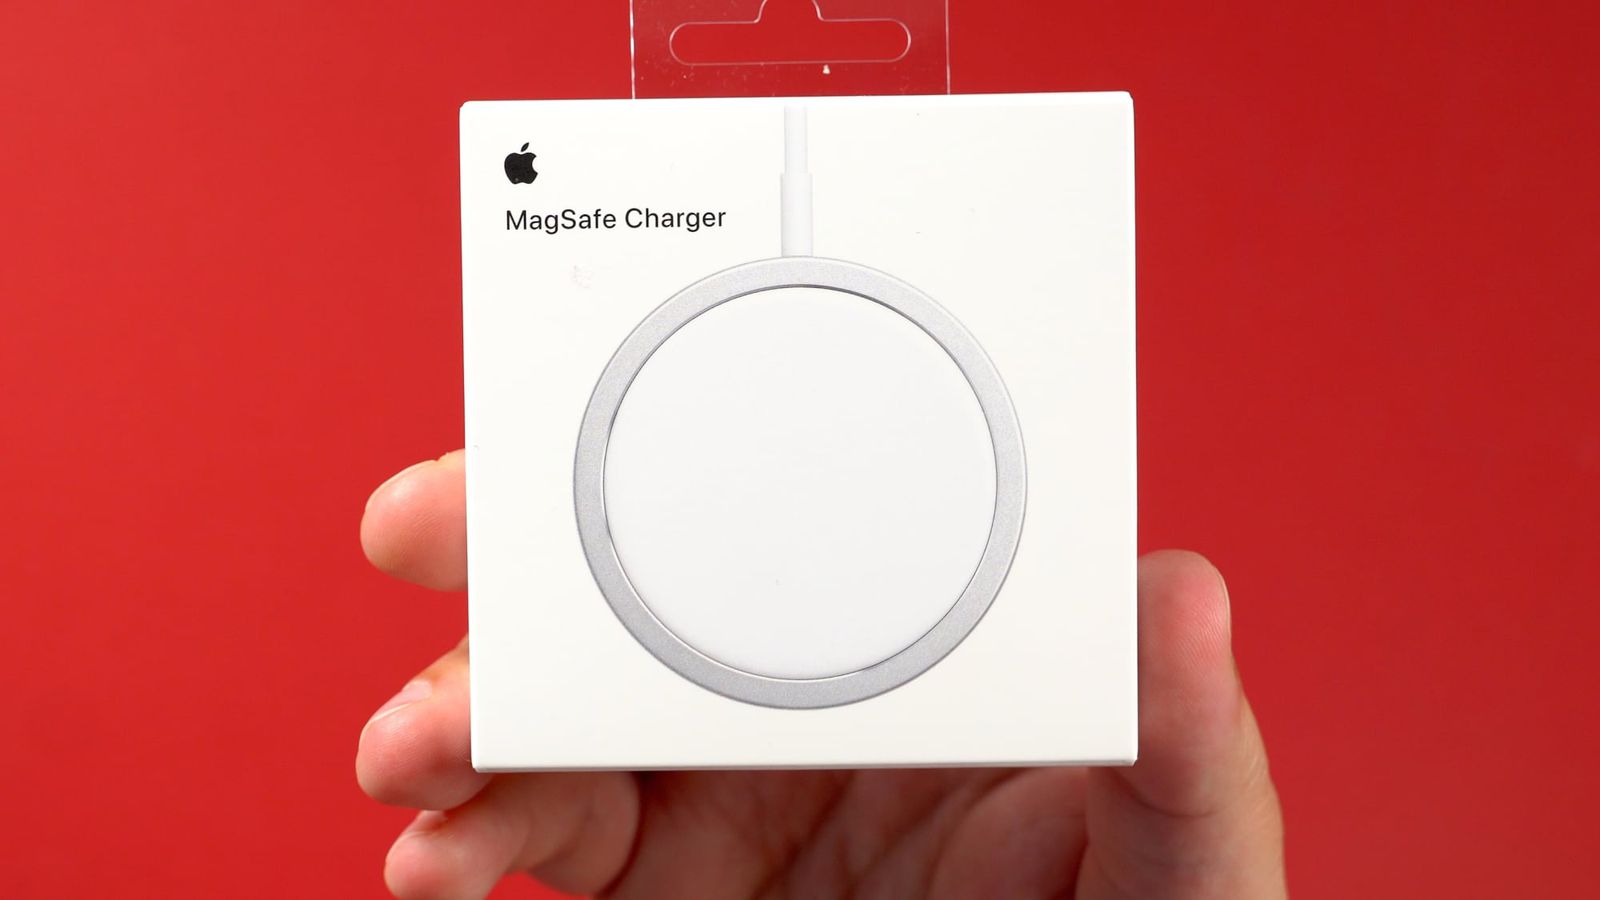 Deals: Get Apple's MagSafe Charger for $29.99 on Woot ($9 Off) - MacRumors